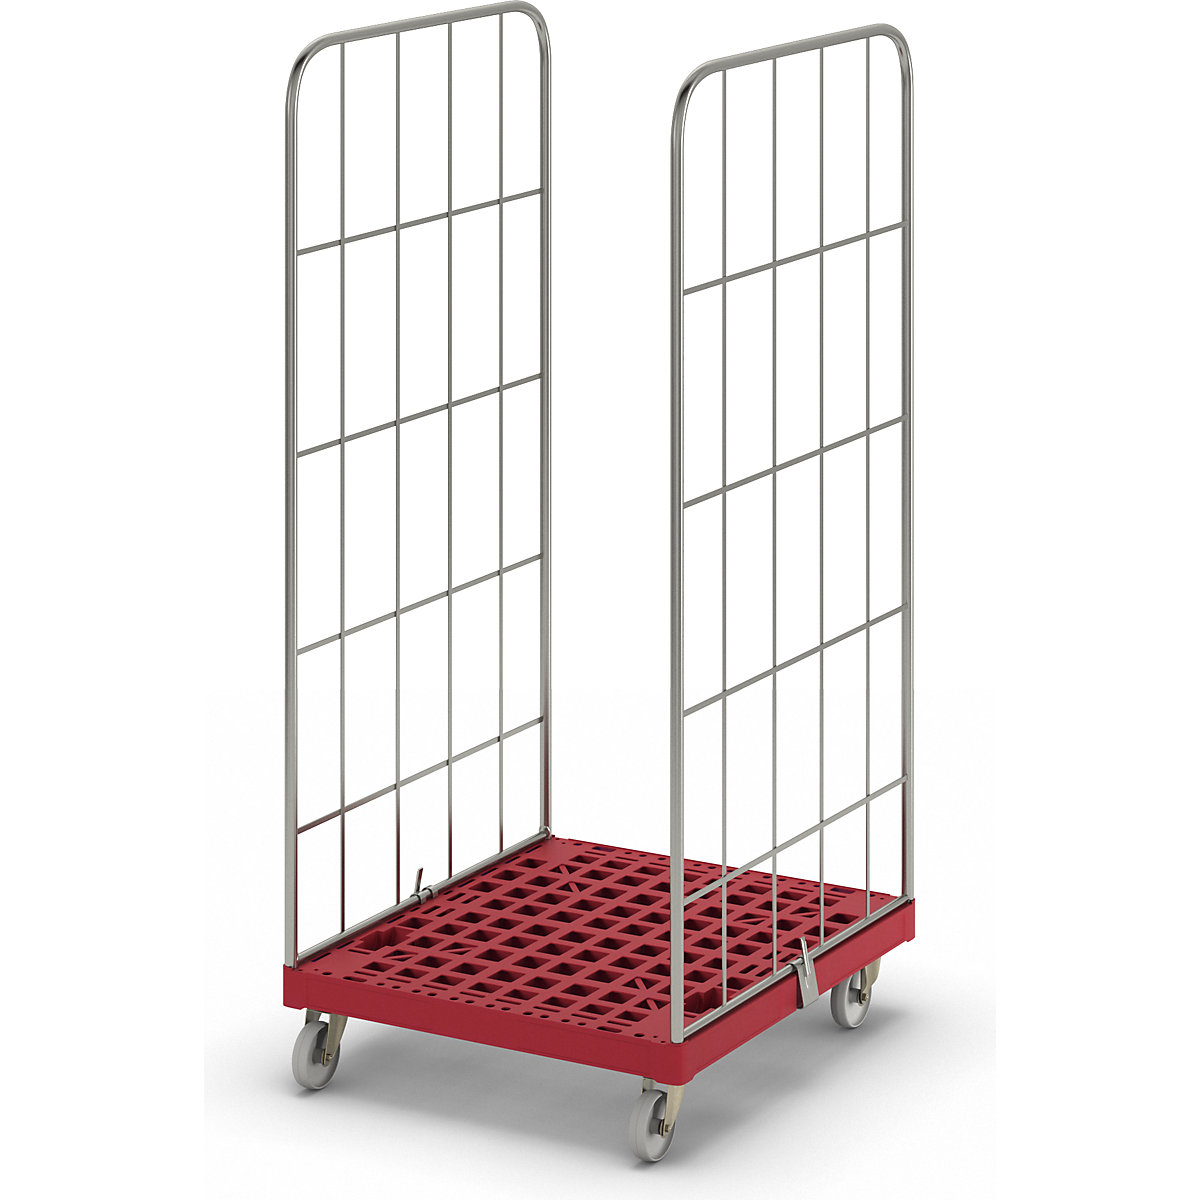 MODULAR roll container, plastic transport dolly, mesh on 2 sides, red dolly-11